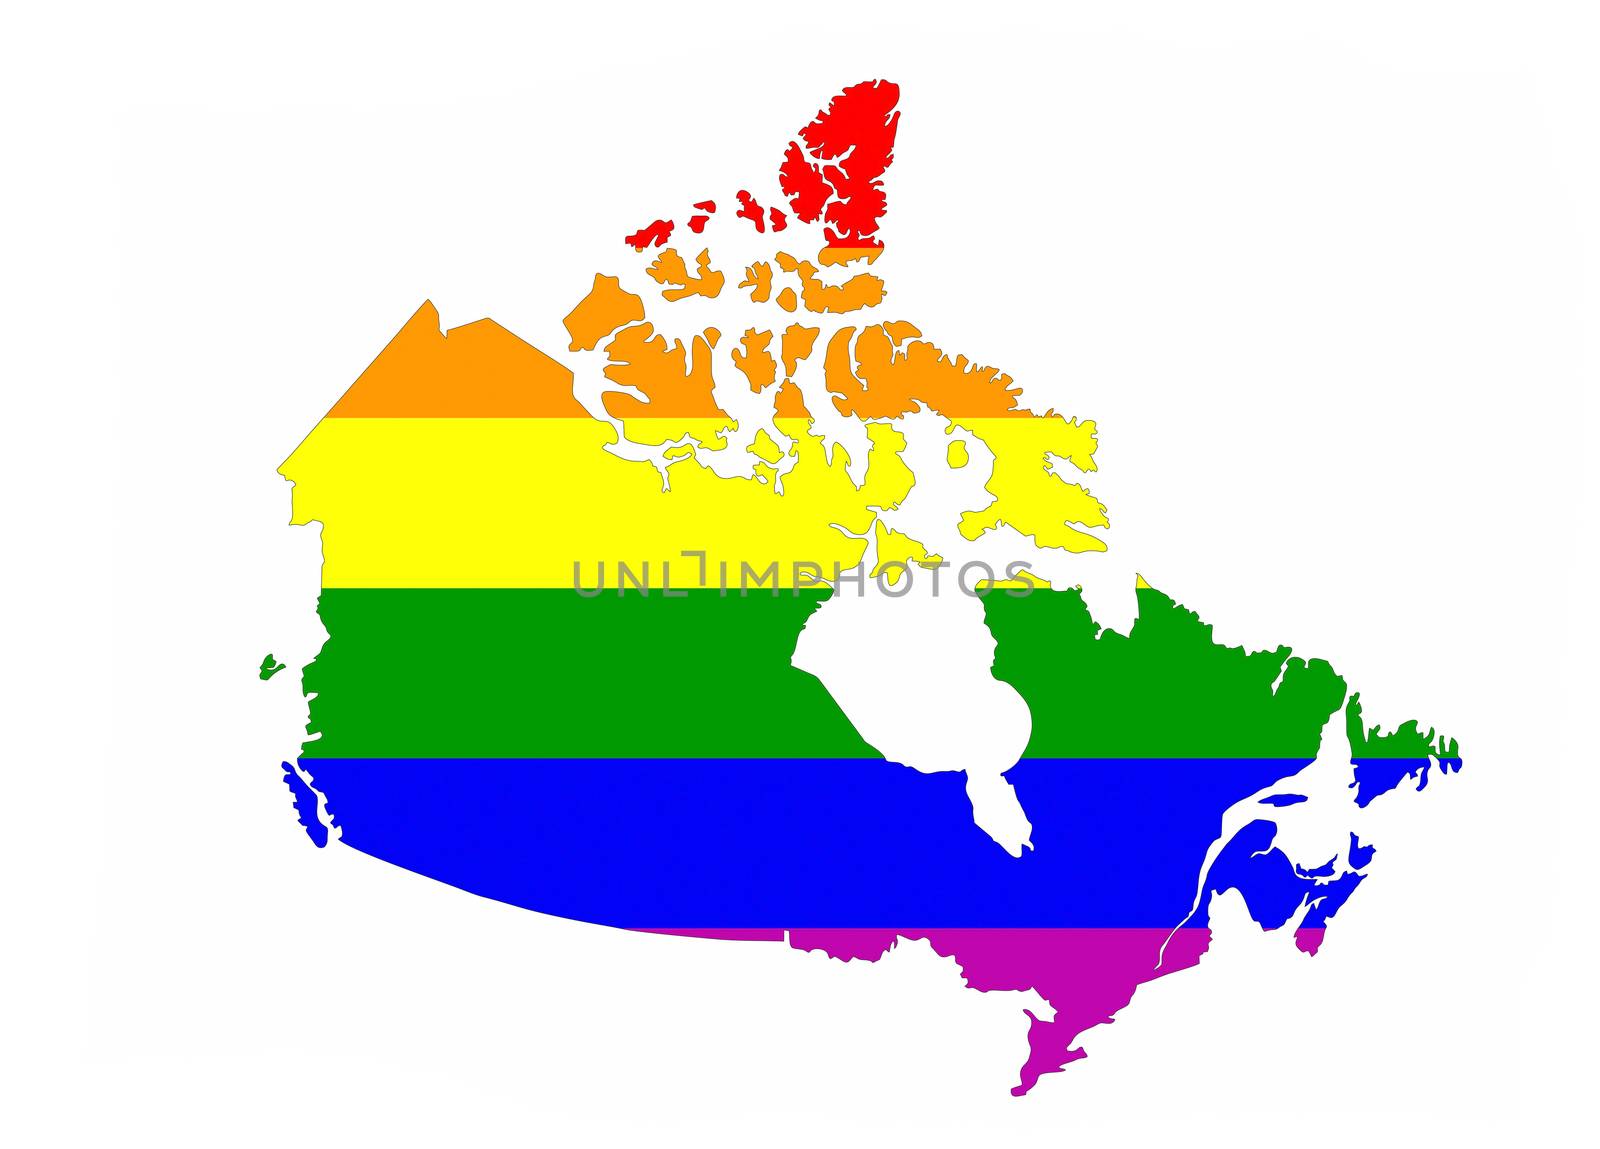 canada country gay pride flag map shape 